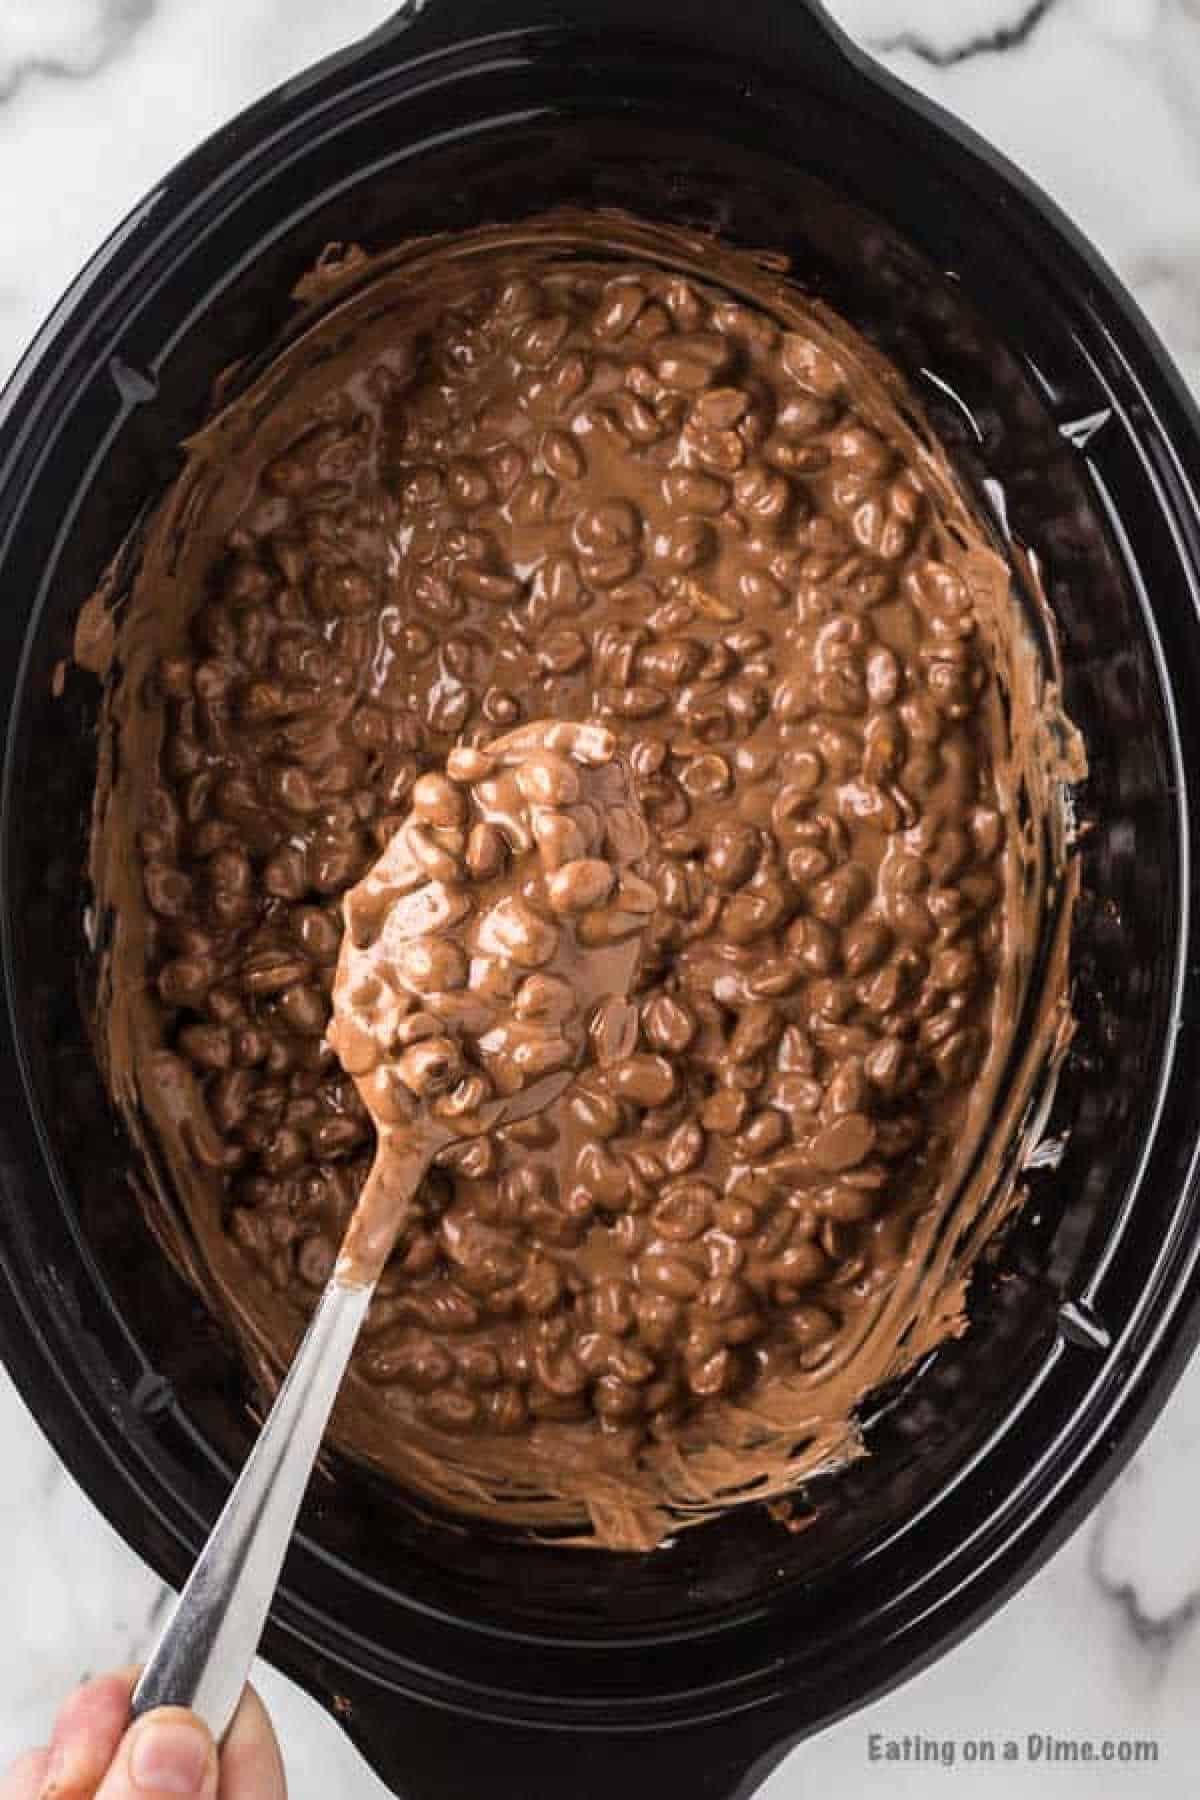 Melted chocolate mixed with peanuts with a serving on a spoon